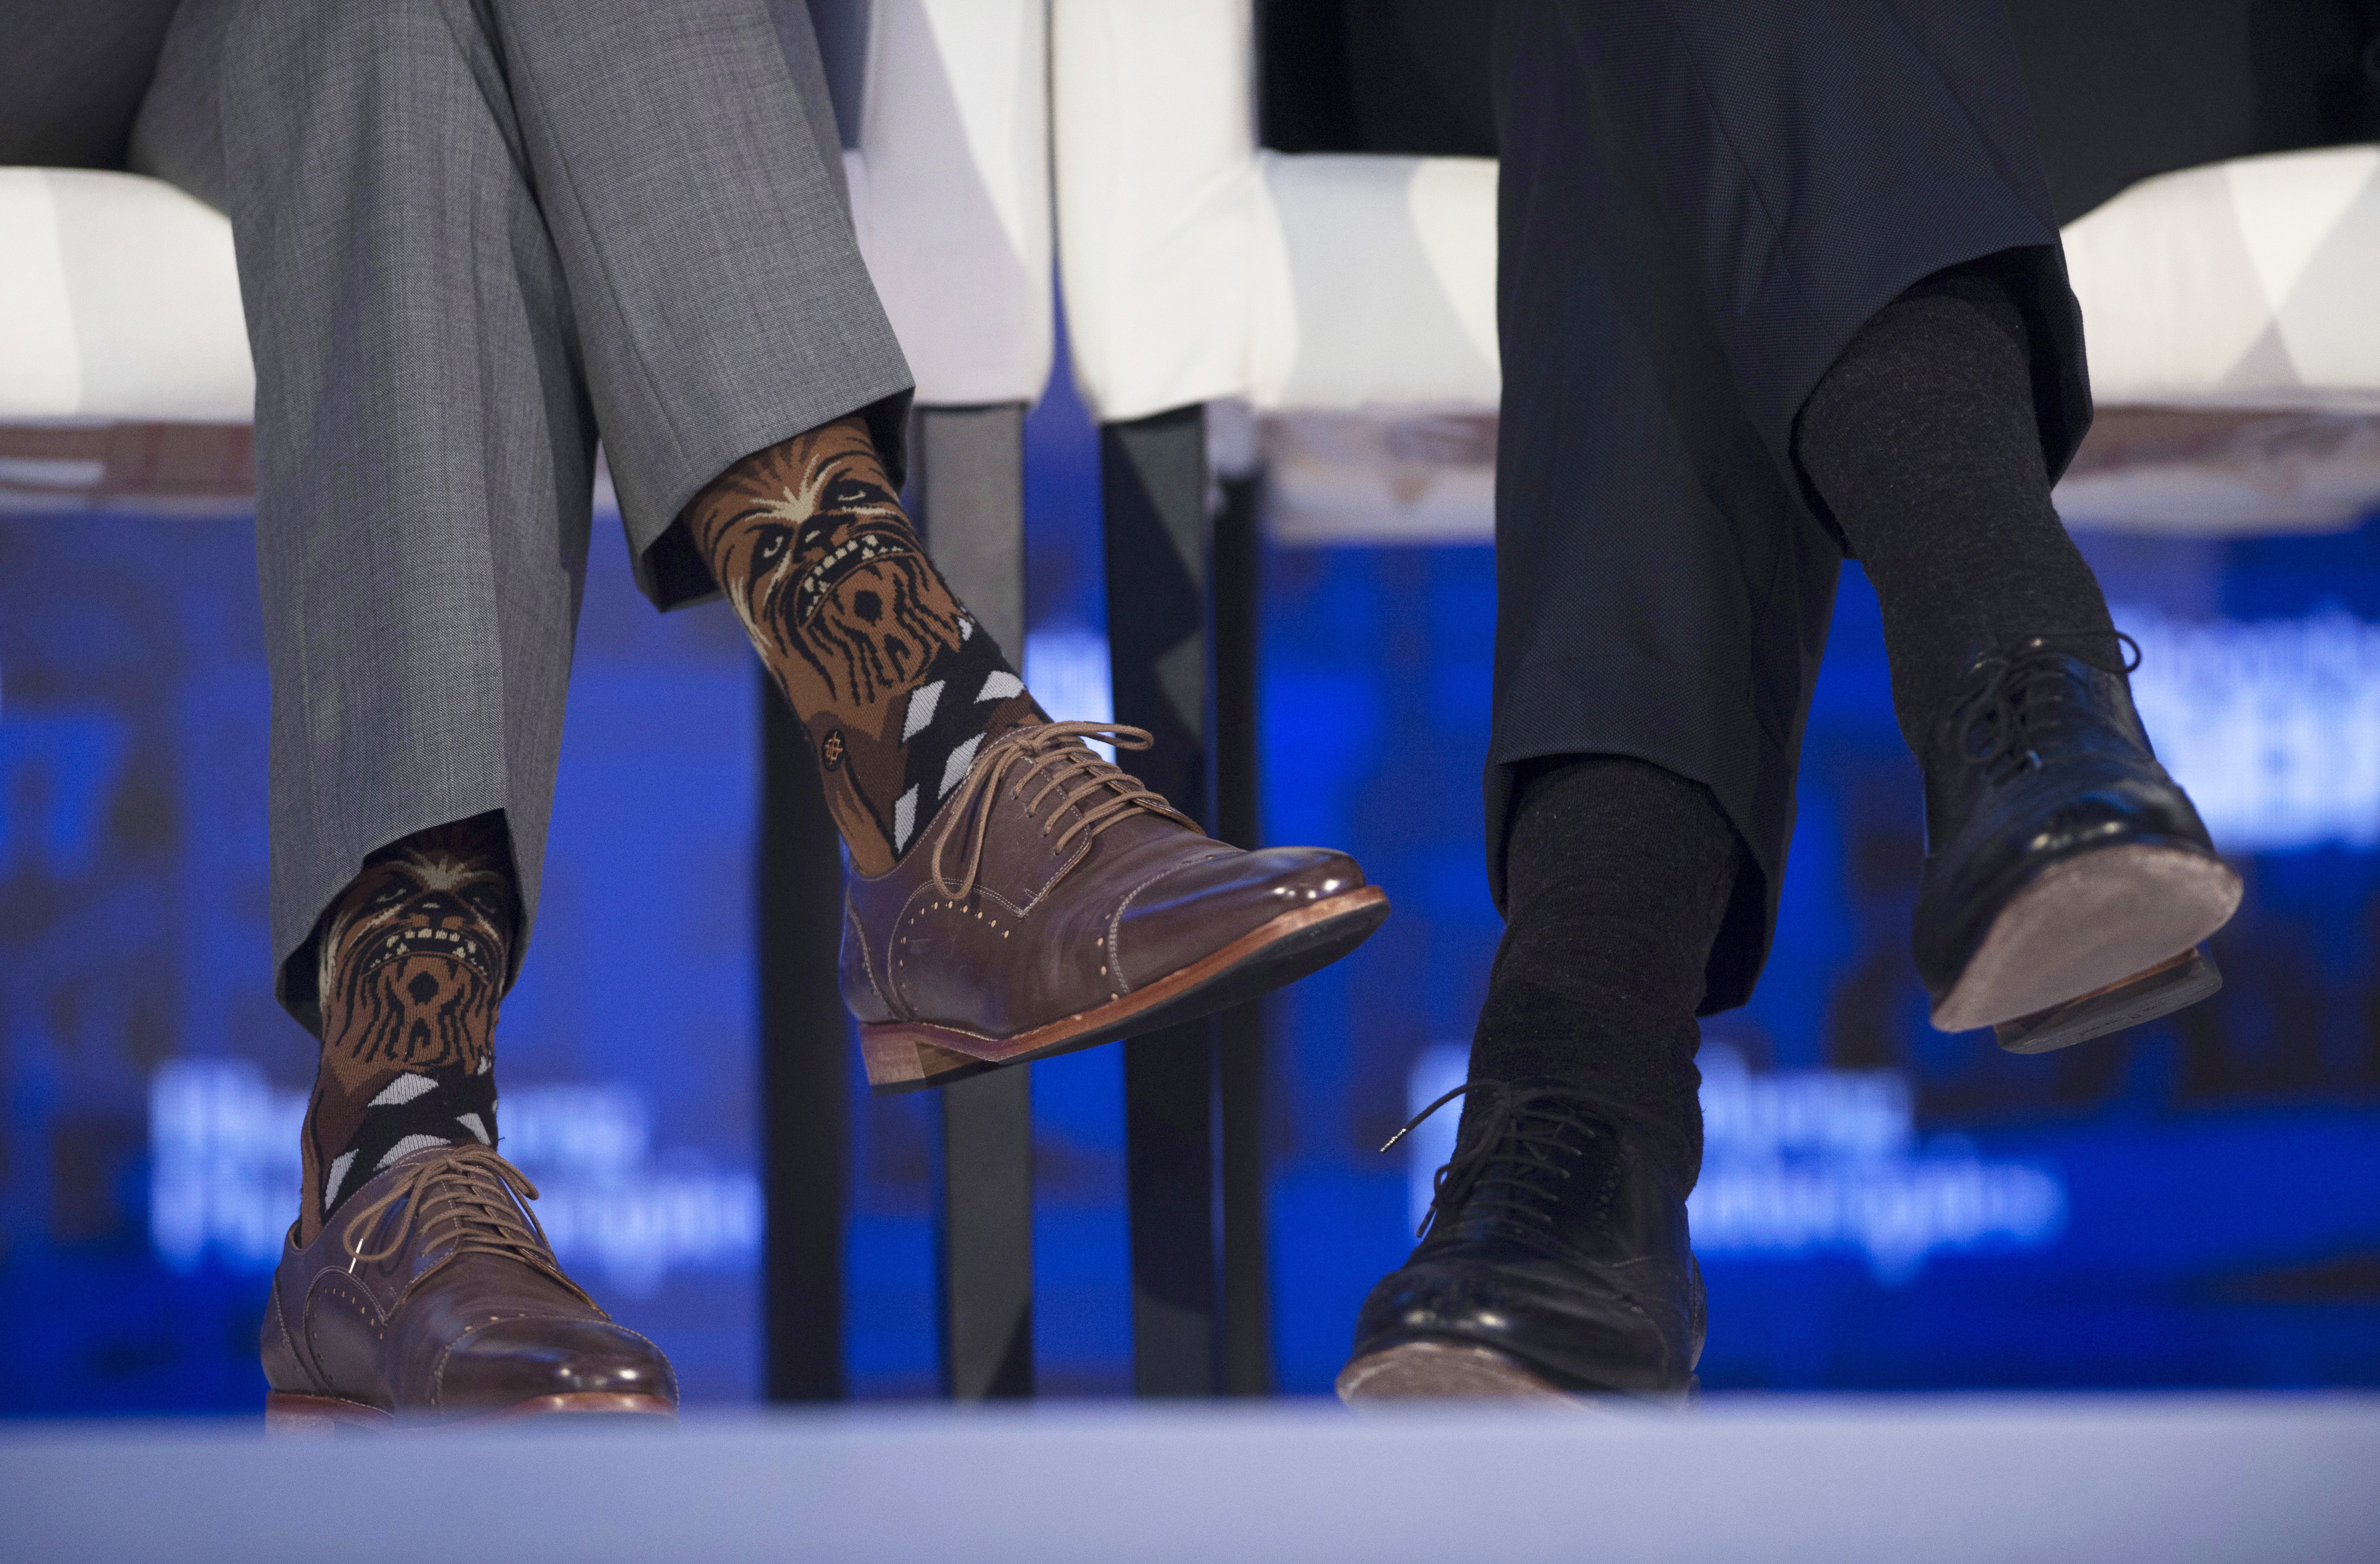 Canada's Prime Minister Justin Trudeau wears a pair of Star Wars-themed socks